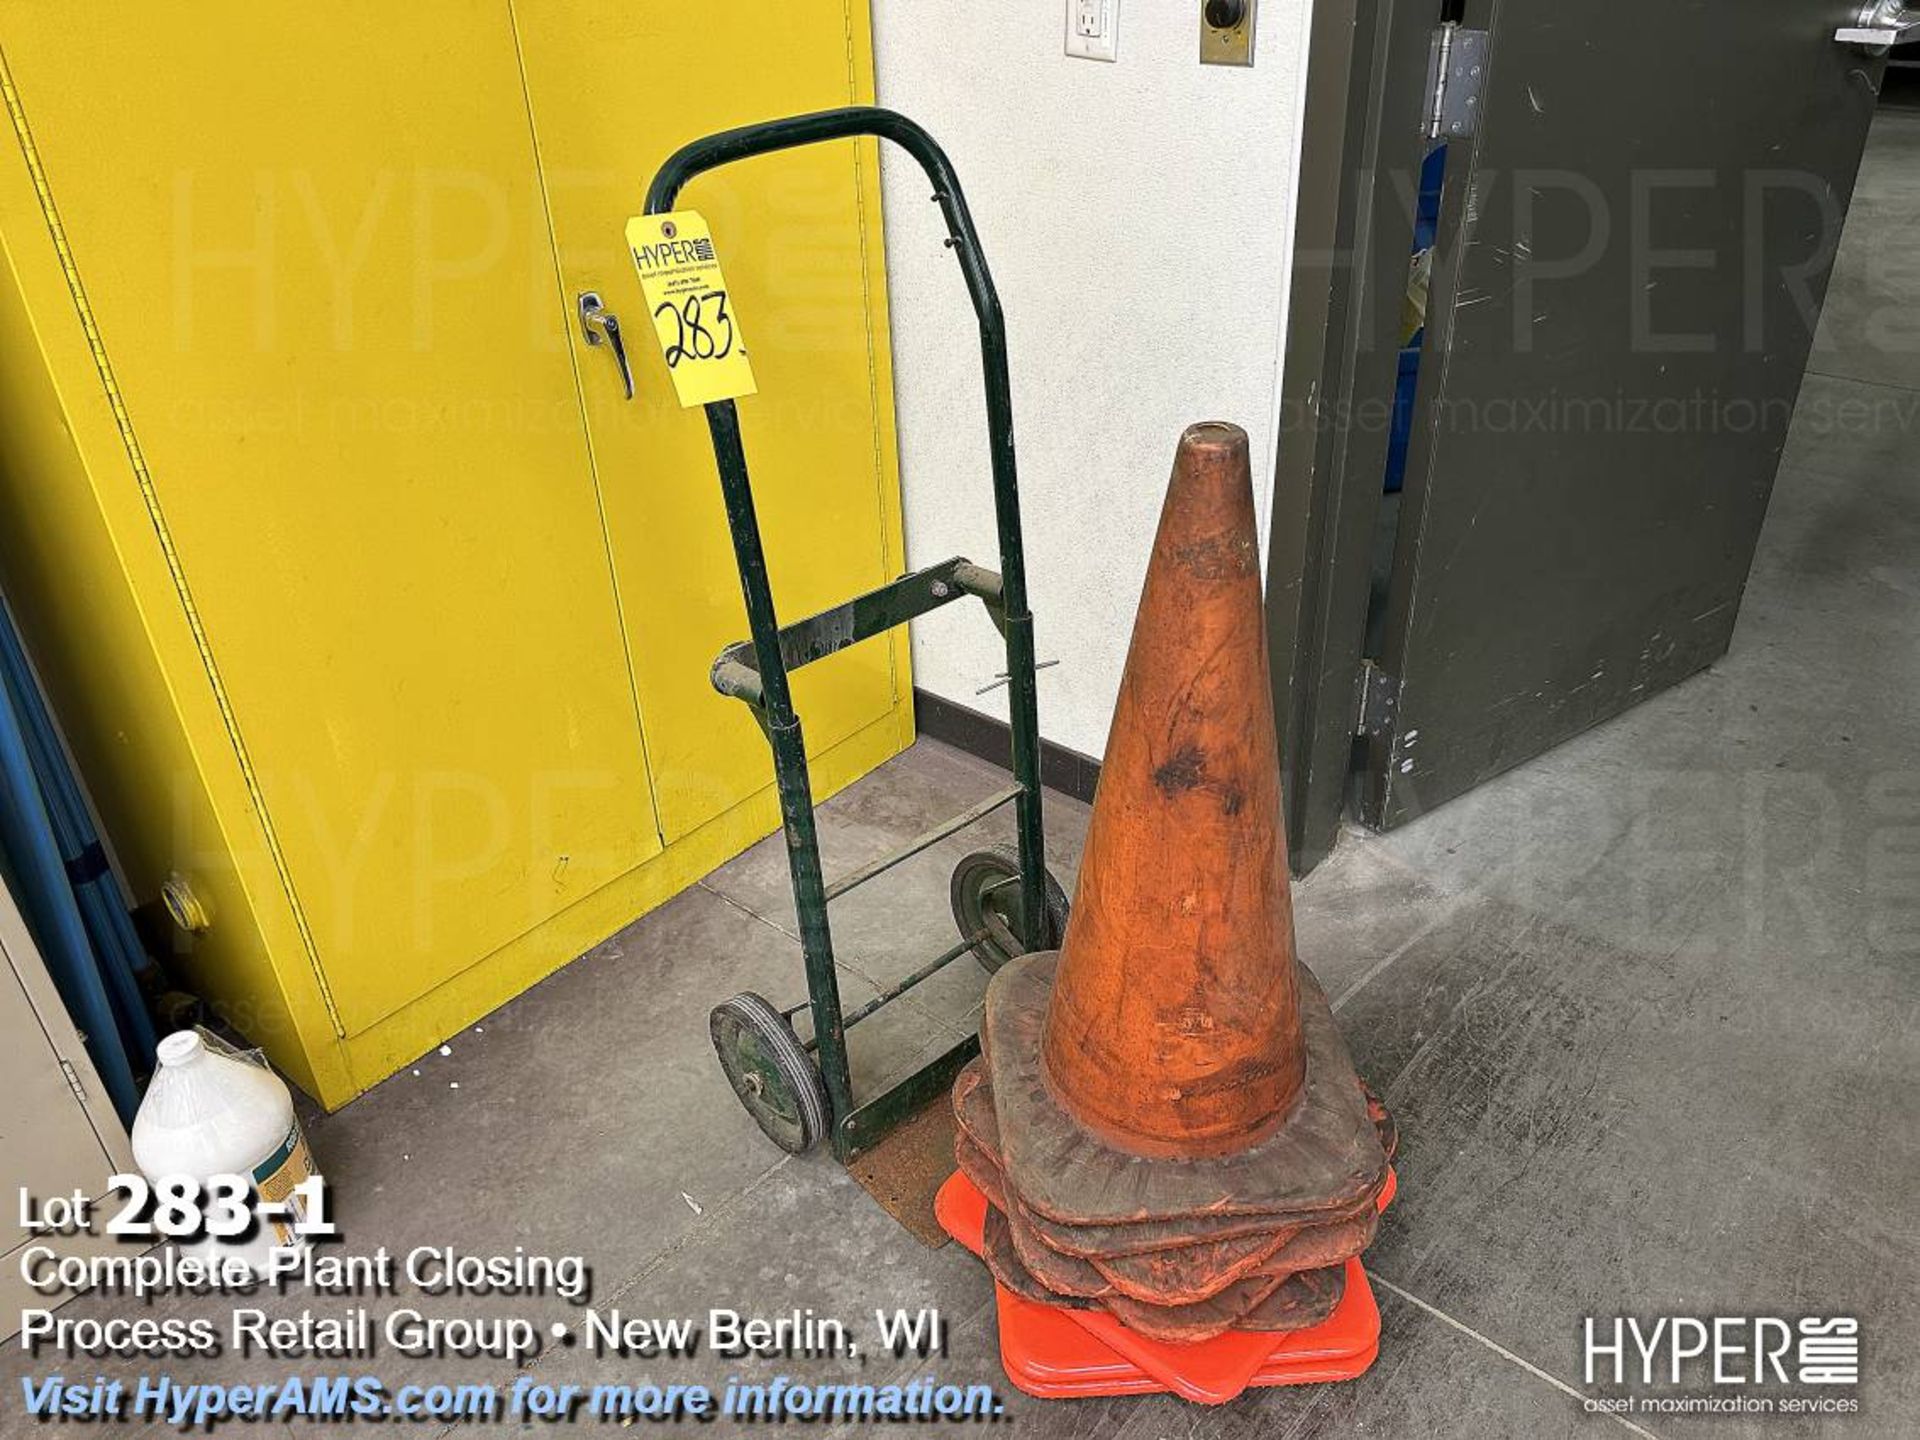 Two wheel dolly, and safety cones